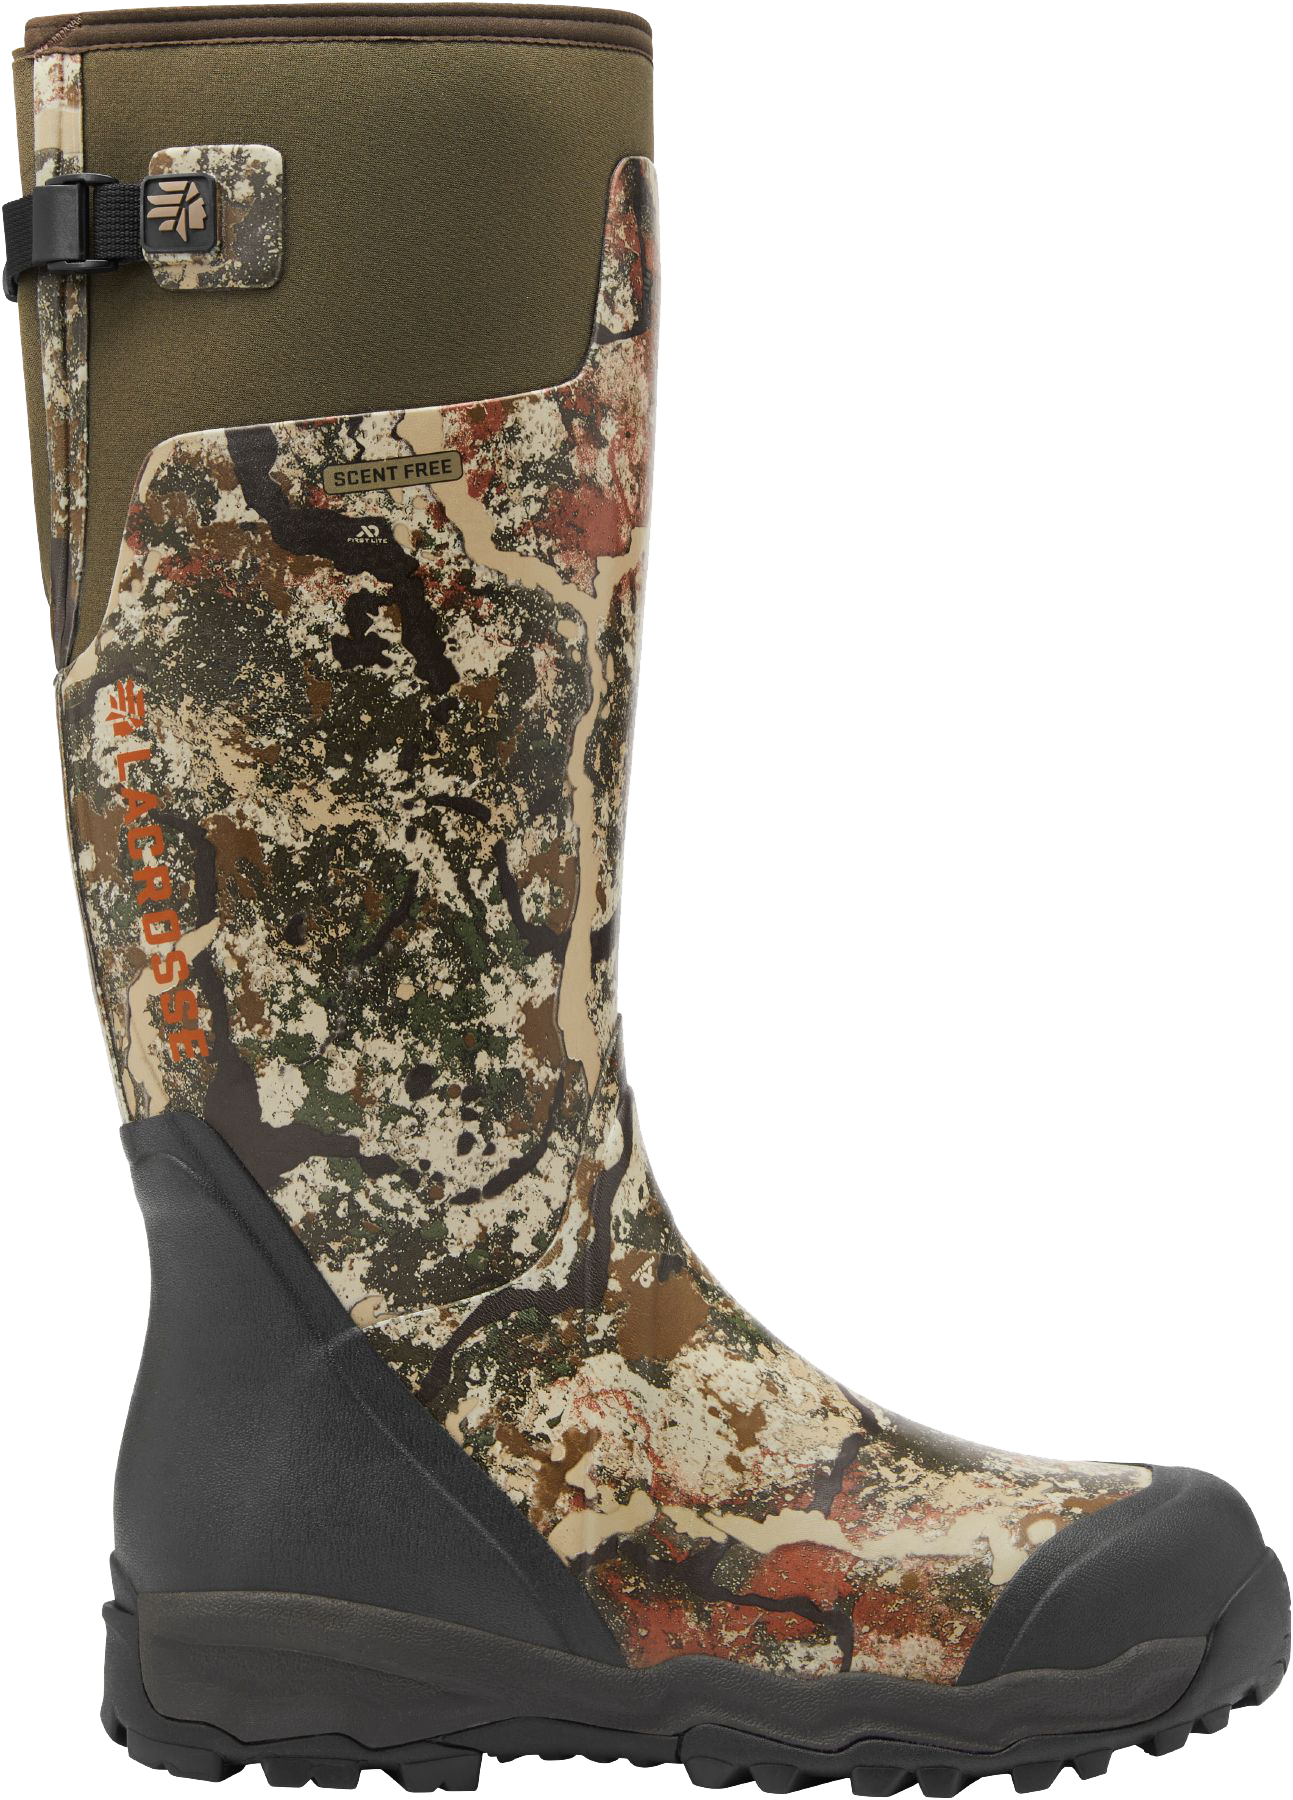 LaCrosse AlphaBurly Pro Hunting Boots for Men - First Lite Specter - 7M